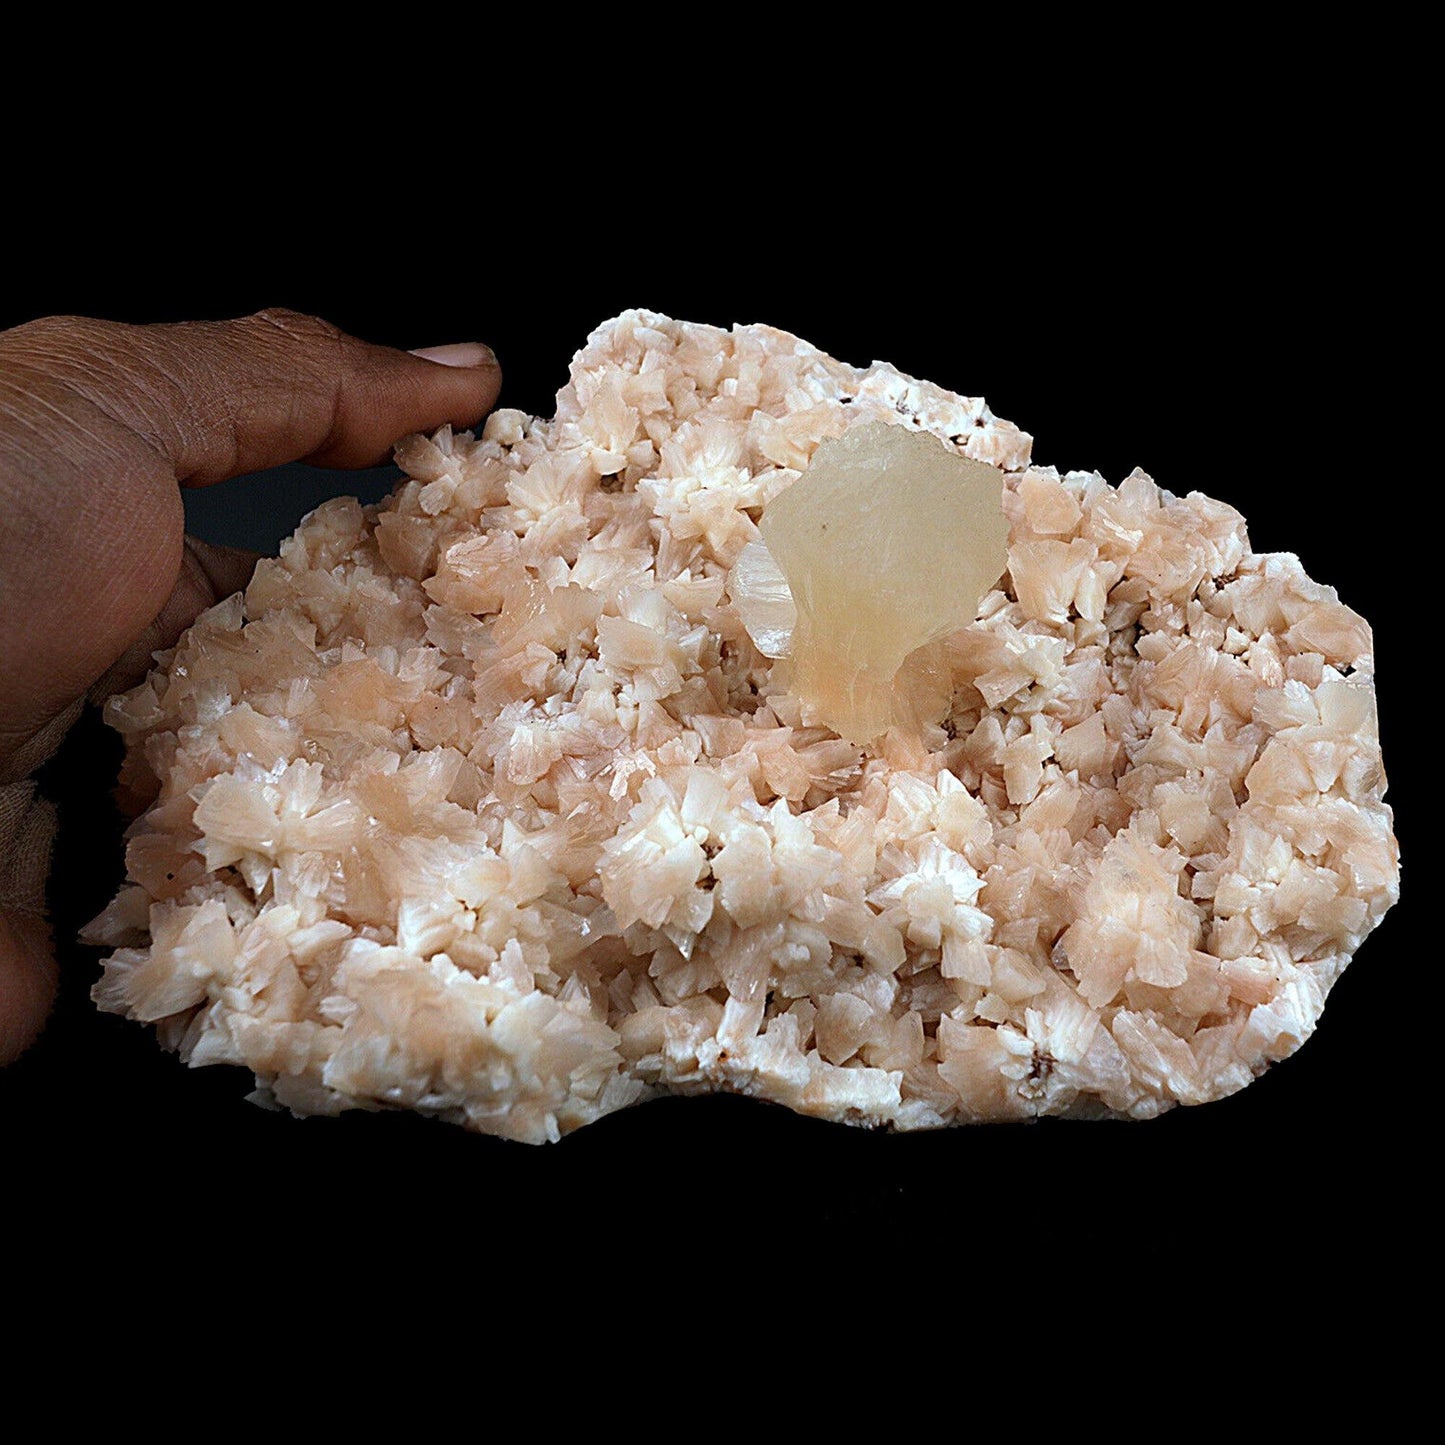 Pink Stilbite on Heulandite Natural Mineral Specimen # B 3434  https://www.superbminerals.us/products/pink-stilbite-on-heulandite-natural-mineral-specimen-b-3434  Features:A very aesthetic piece featuring a matrix densely coated with miniature, beige Heuladnite crystals with a lustrous, larger light-beige Stilbite crystals on matrix, Great contrast, color, symmetry and luster. In excellent condition. Primary Mineral(s): Stilbite